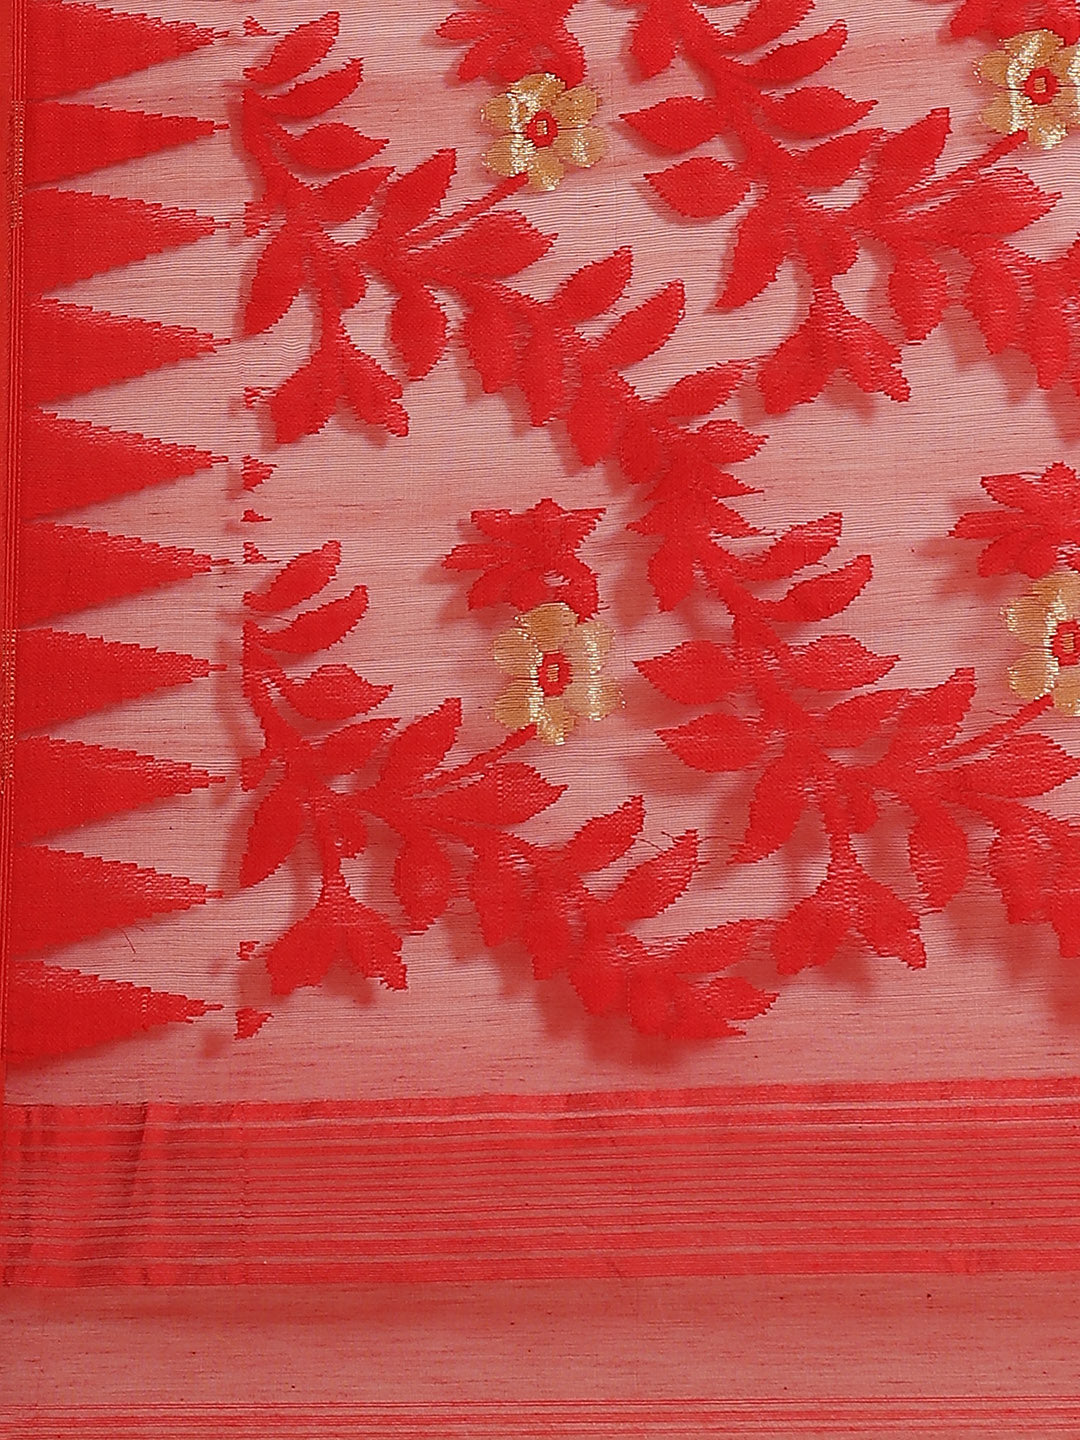 Red and Green, Kalakari India Jamdani Silk Cotton Woven Design Saree without blouse CHBHSA0043-Saree-Kalakari India-CHBHSA0043-Bengal, Geographical Indication, Hand Crafted, Hand Painted, Heritage Prints, Jamdani, Natural Dyes, Red, Sarees, Silk Blended, Sustainable Fabrics, Woven, Yellow-[Linen,Ethnic,wear,Fashionista,Handloom,Handicraft,Indigo,blockprint,block,print,Cotton,Chanderi,Blue, latest,classy,party,bollywood,trendy,summer,style,traditional,formal,elegant,unique,style,hand,block,print,